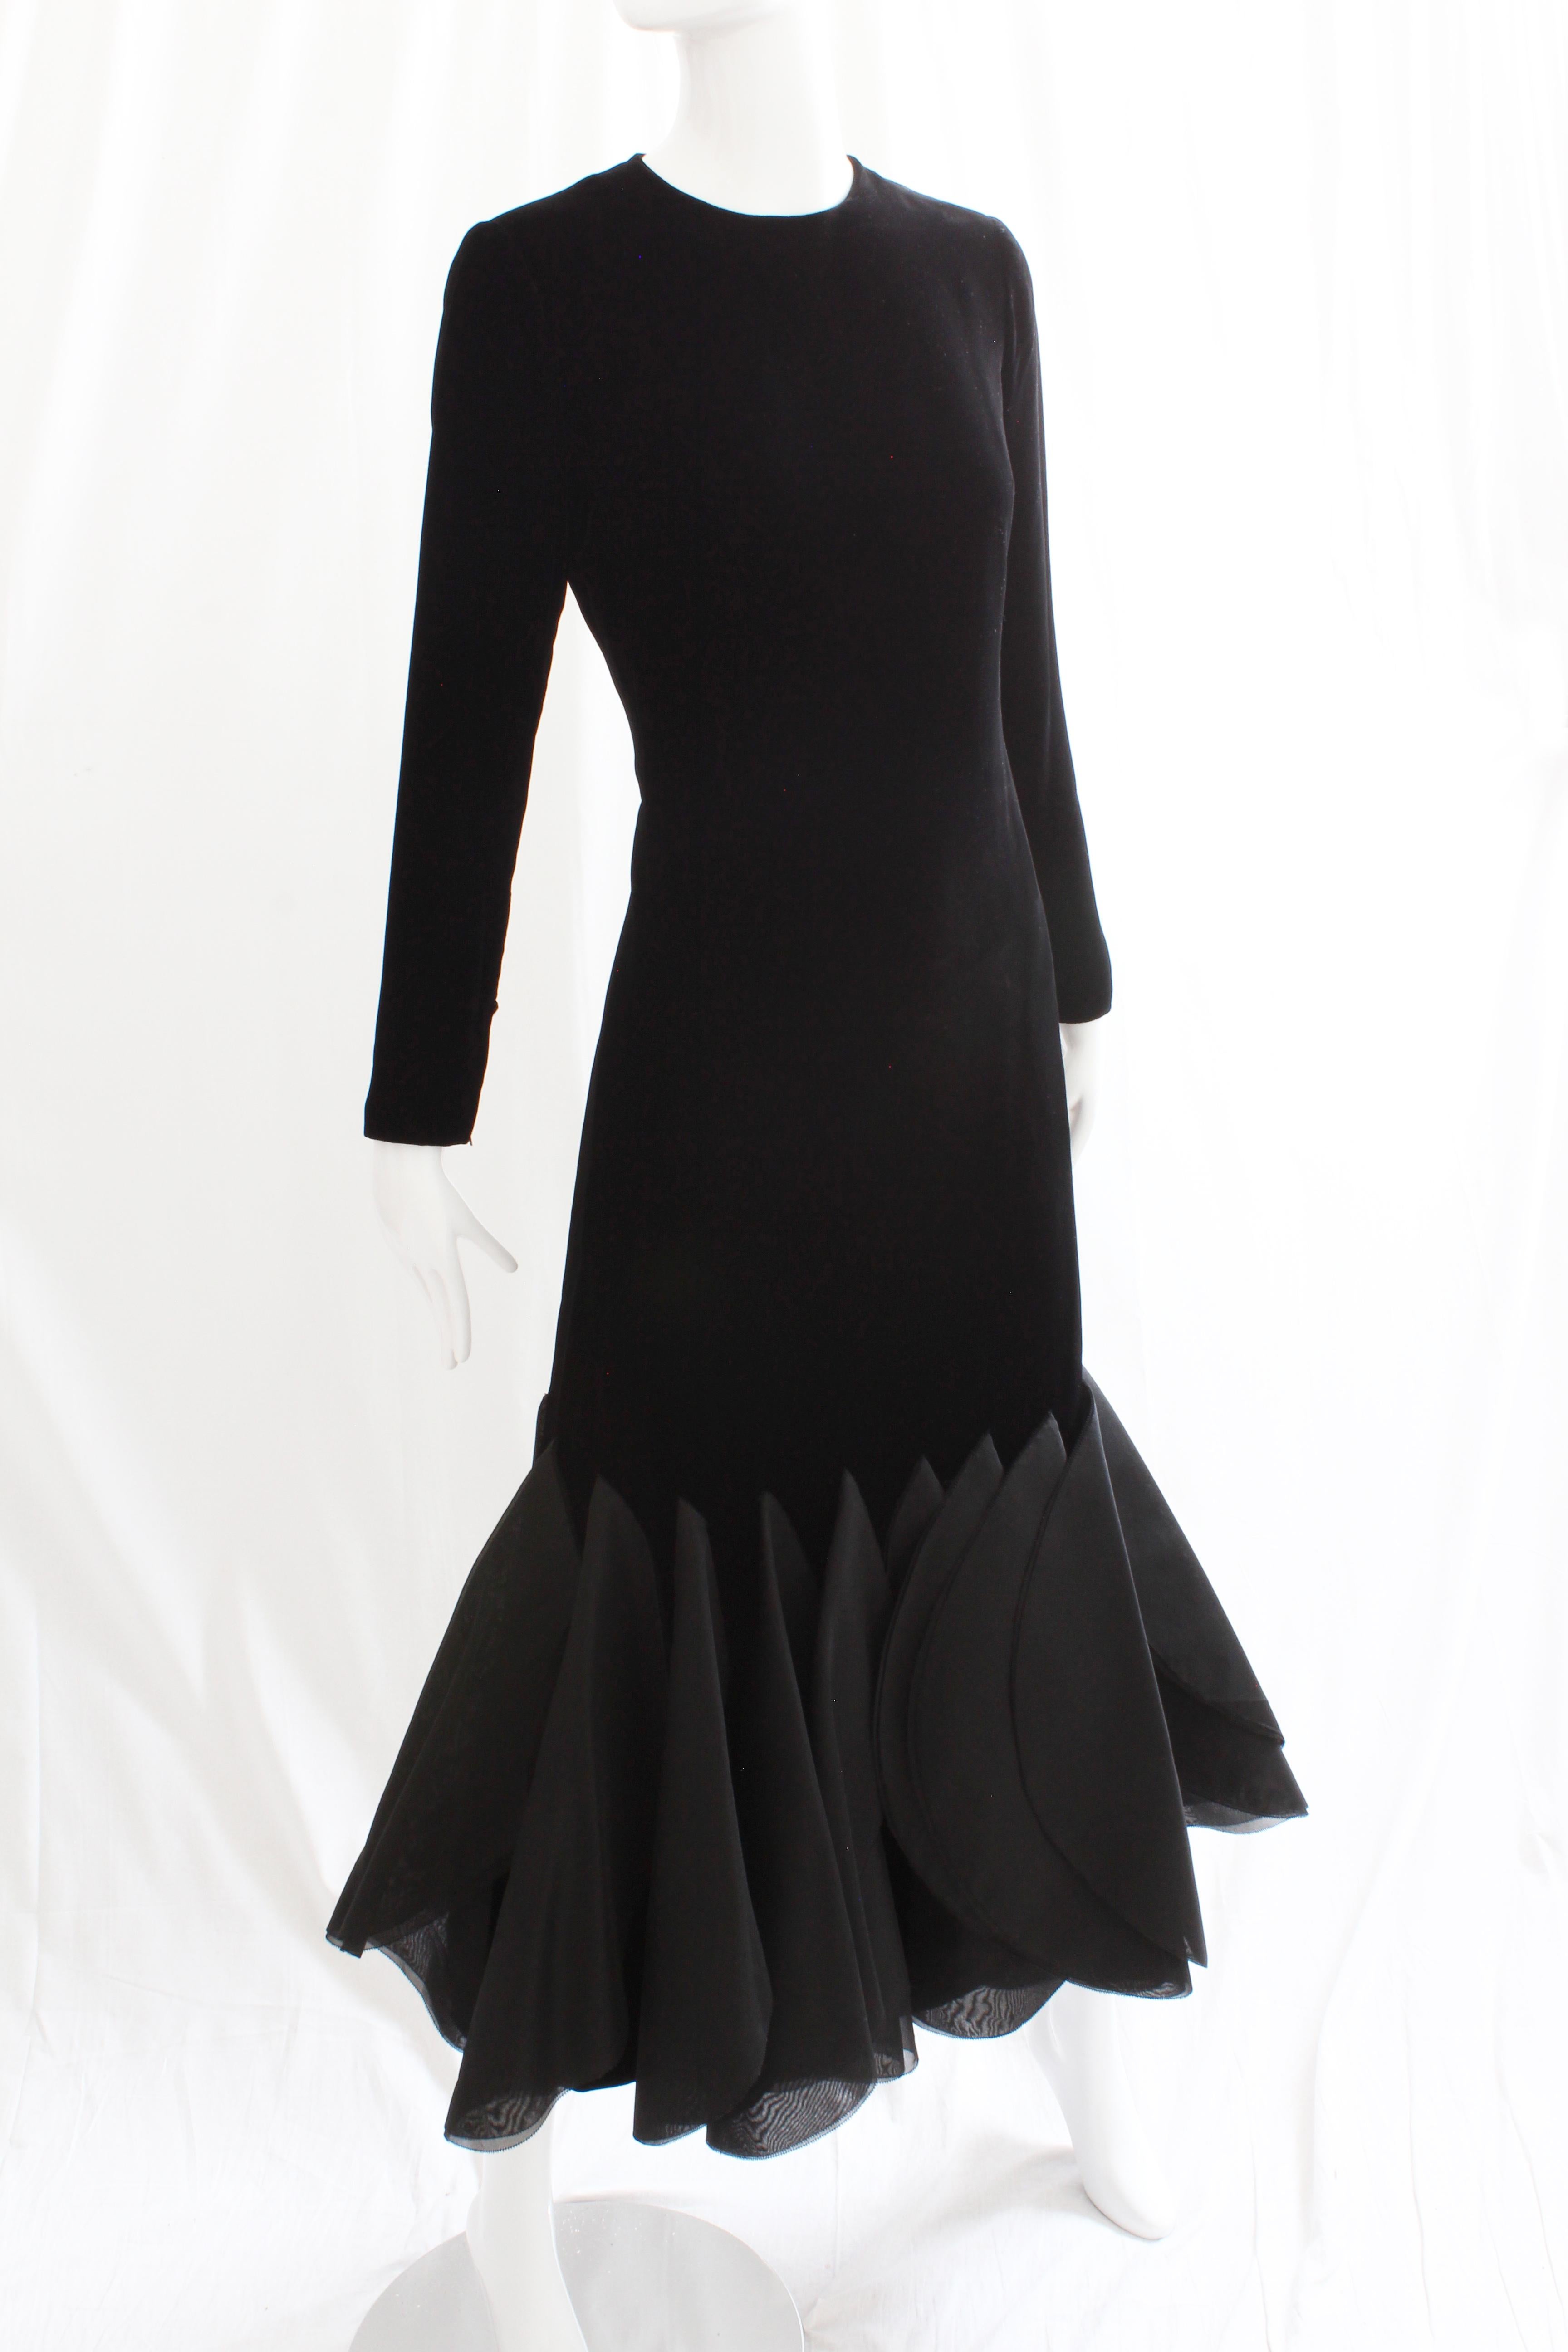 This incredibly rare evening gown was designed by Pierre Cardin in the late 1960s for his Space Age and Futurism collection.  Made from what we believe is silk velvet (no content label), it features sheer circular fins at the hem, made from double